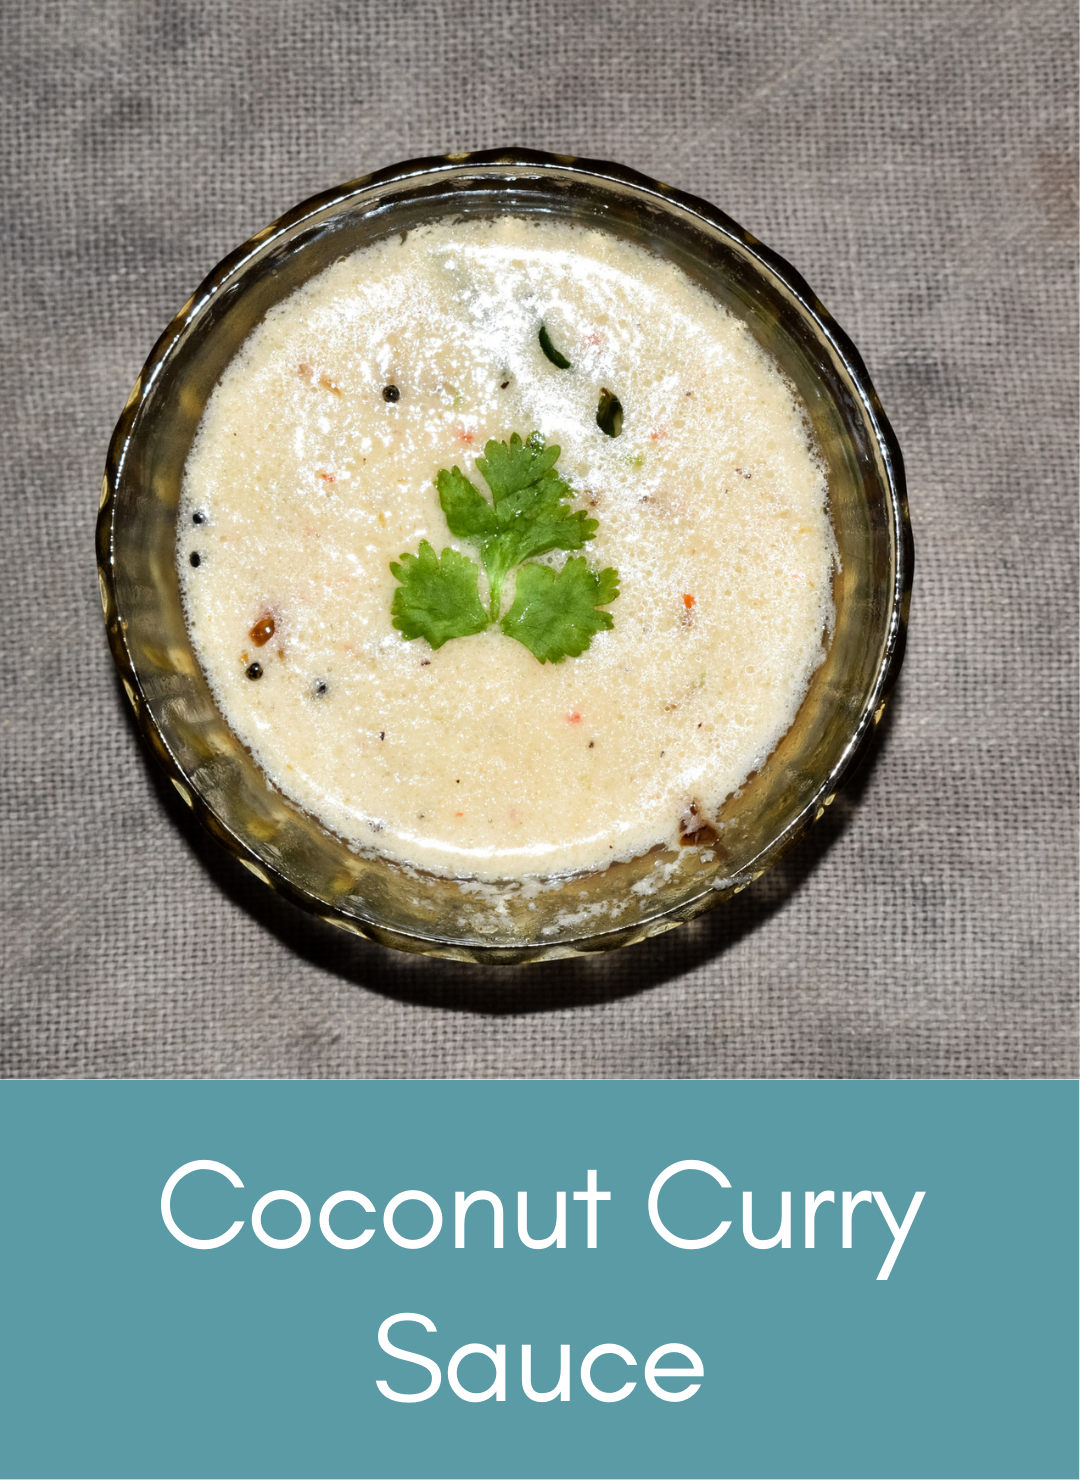 whole food plant based vegan coconut curry sauce Picture with link to recipe